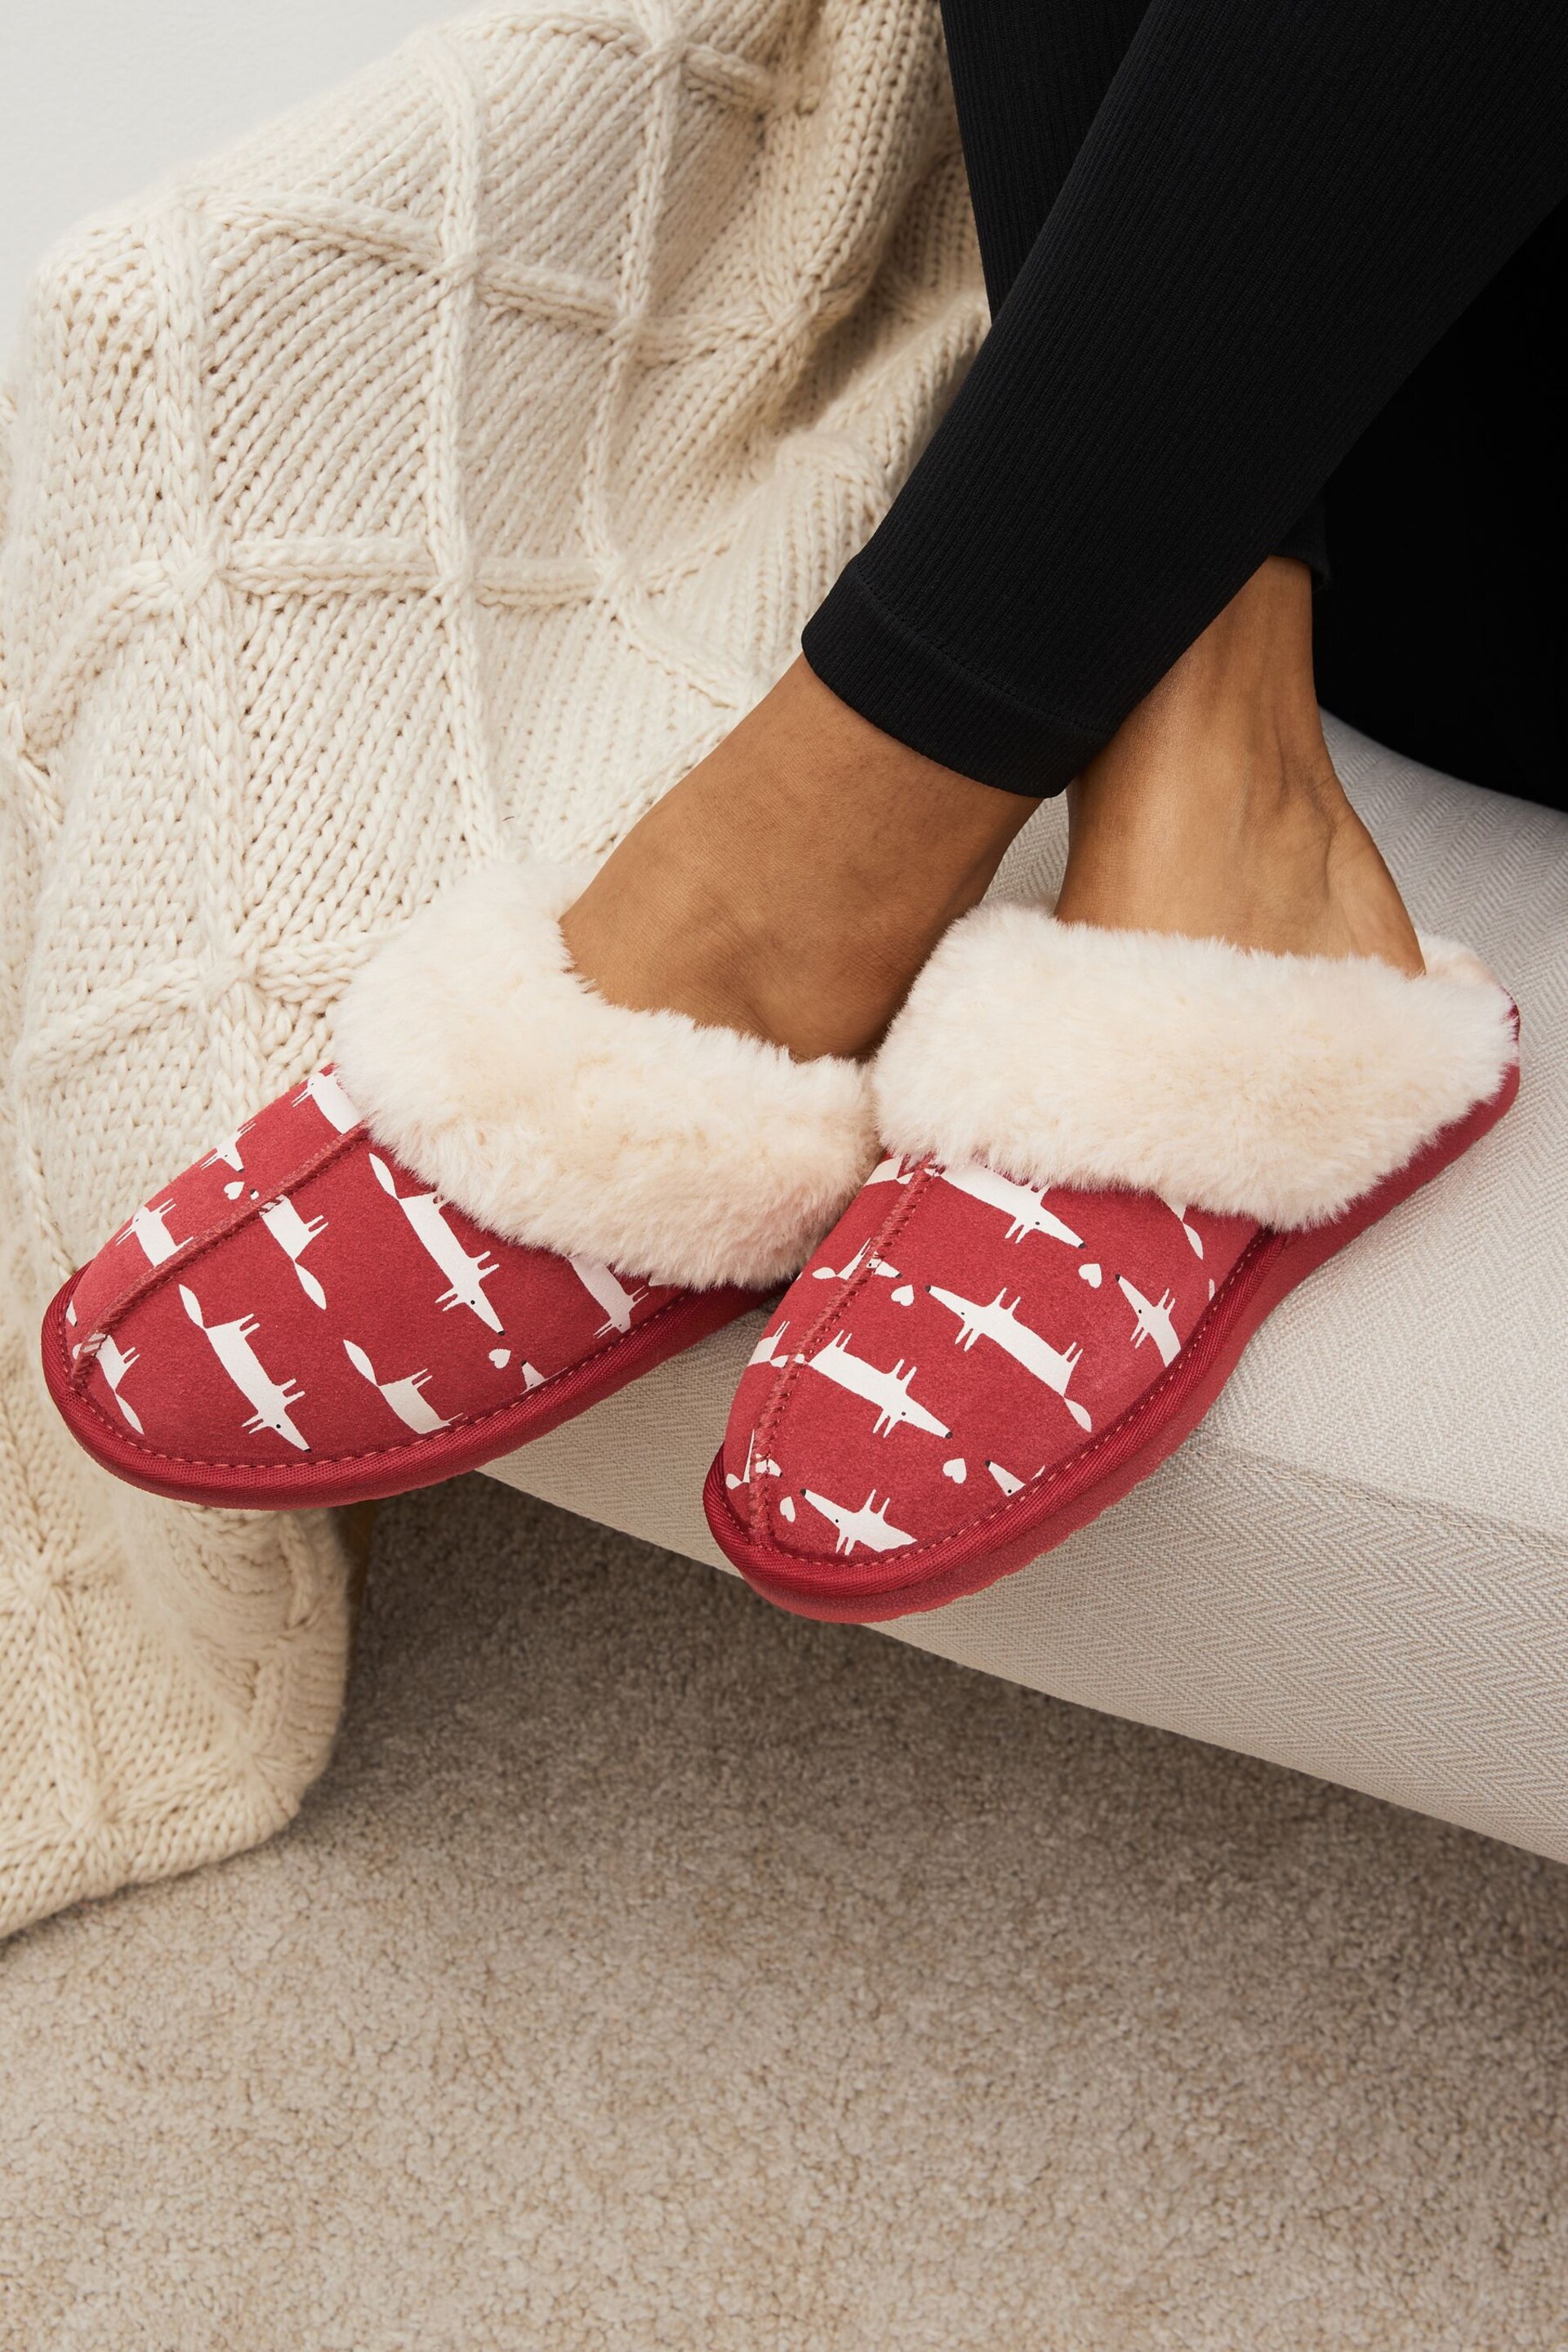 Red Scion Fox Suede Mule Slippers - Image 1 of 7